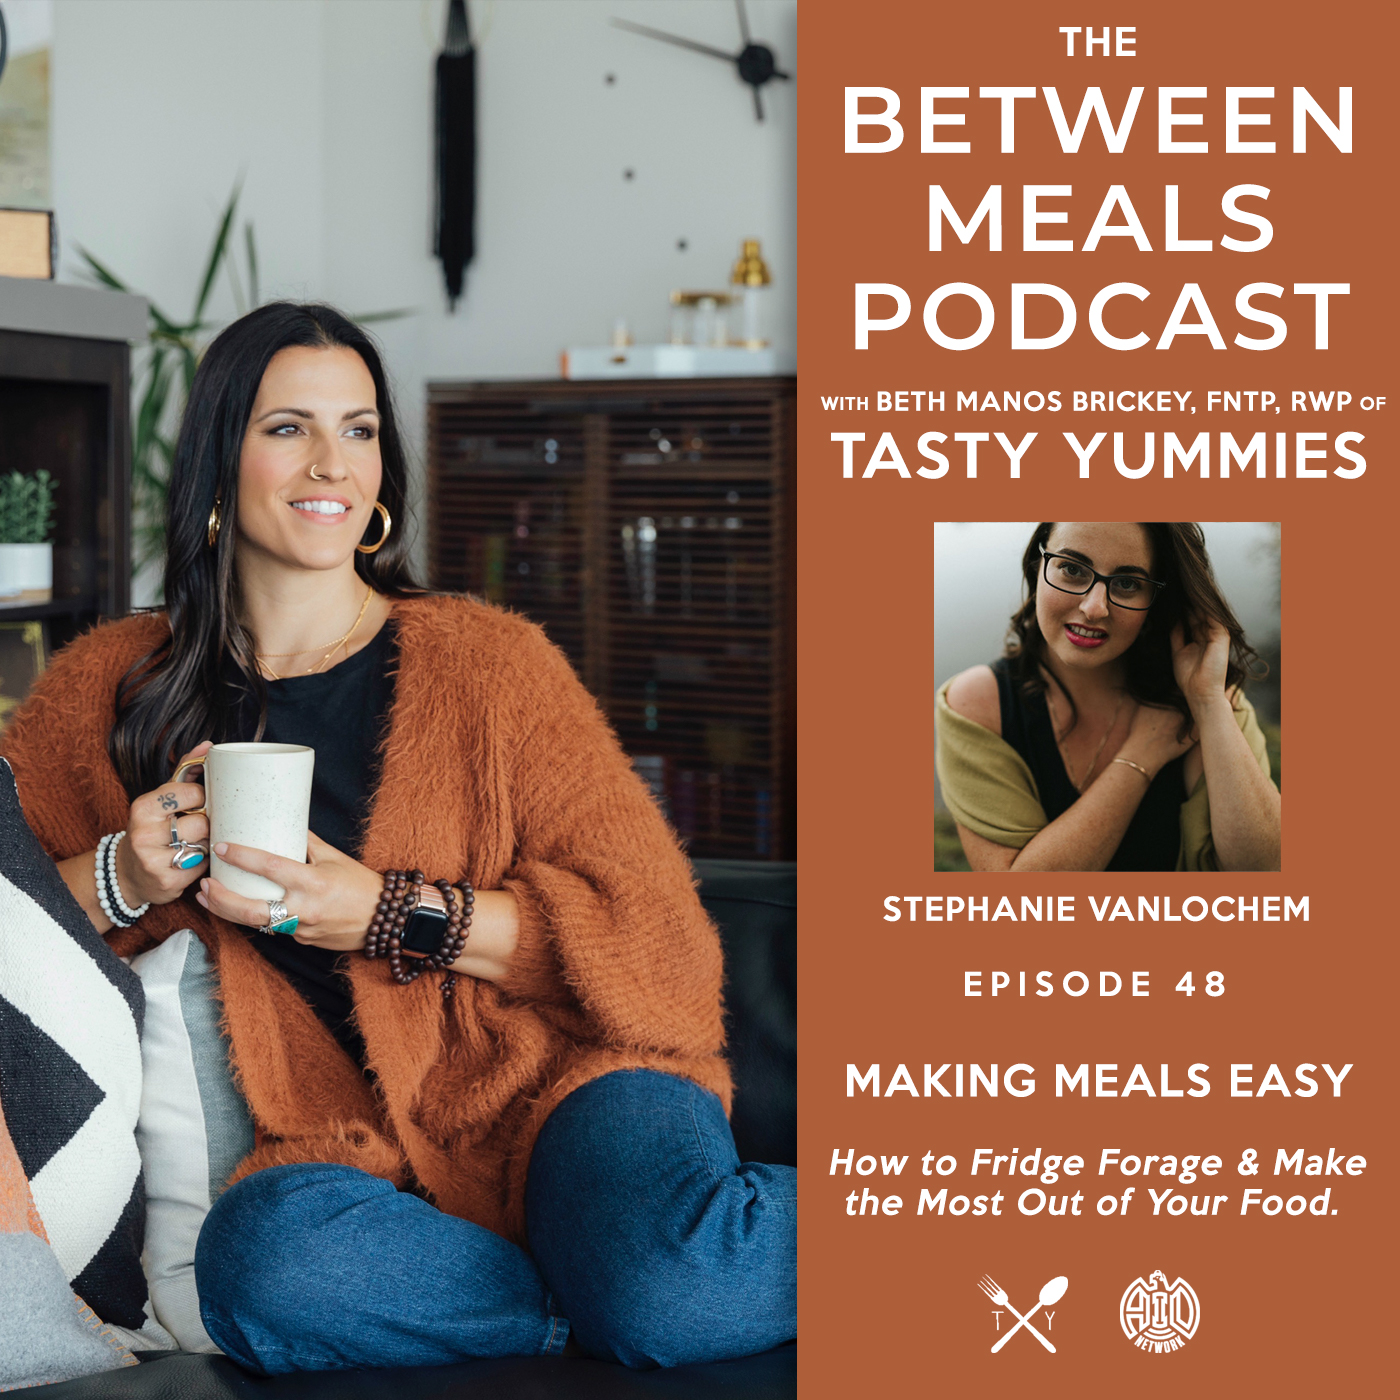 Between Meals Podcast. Episode 48: Making Meals Easy – How to Fridge Forage and Make the Most of Your Food